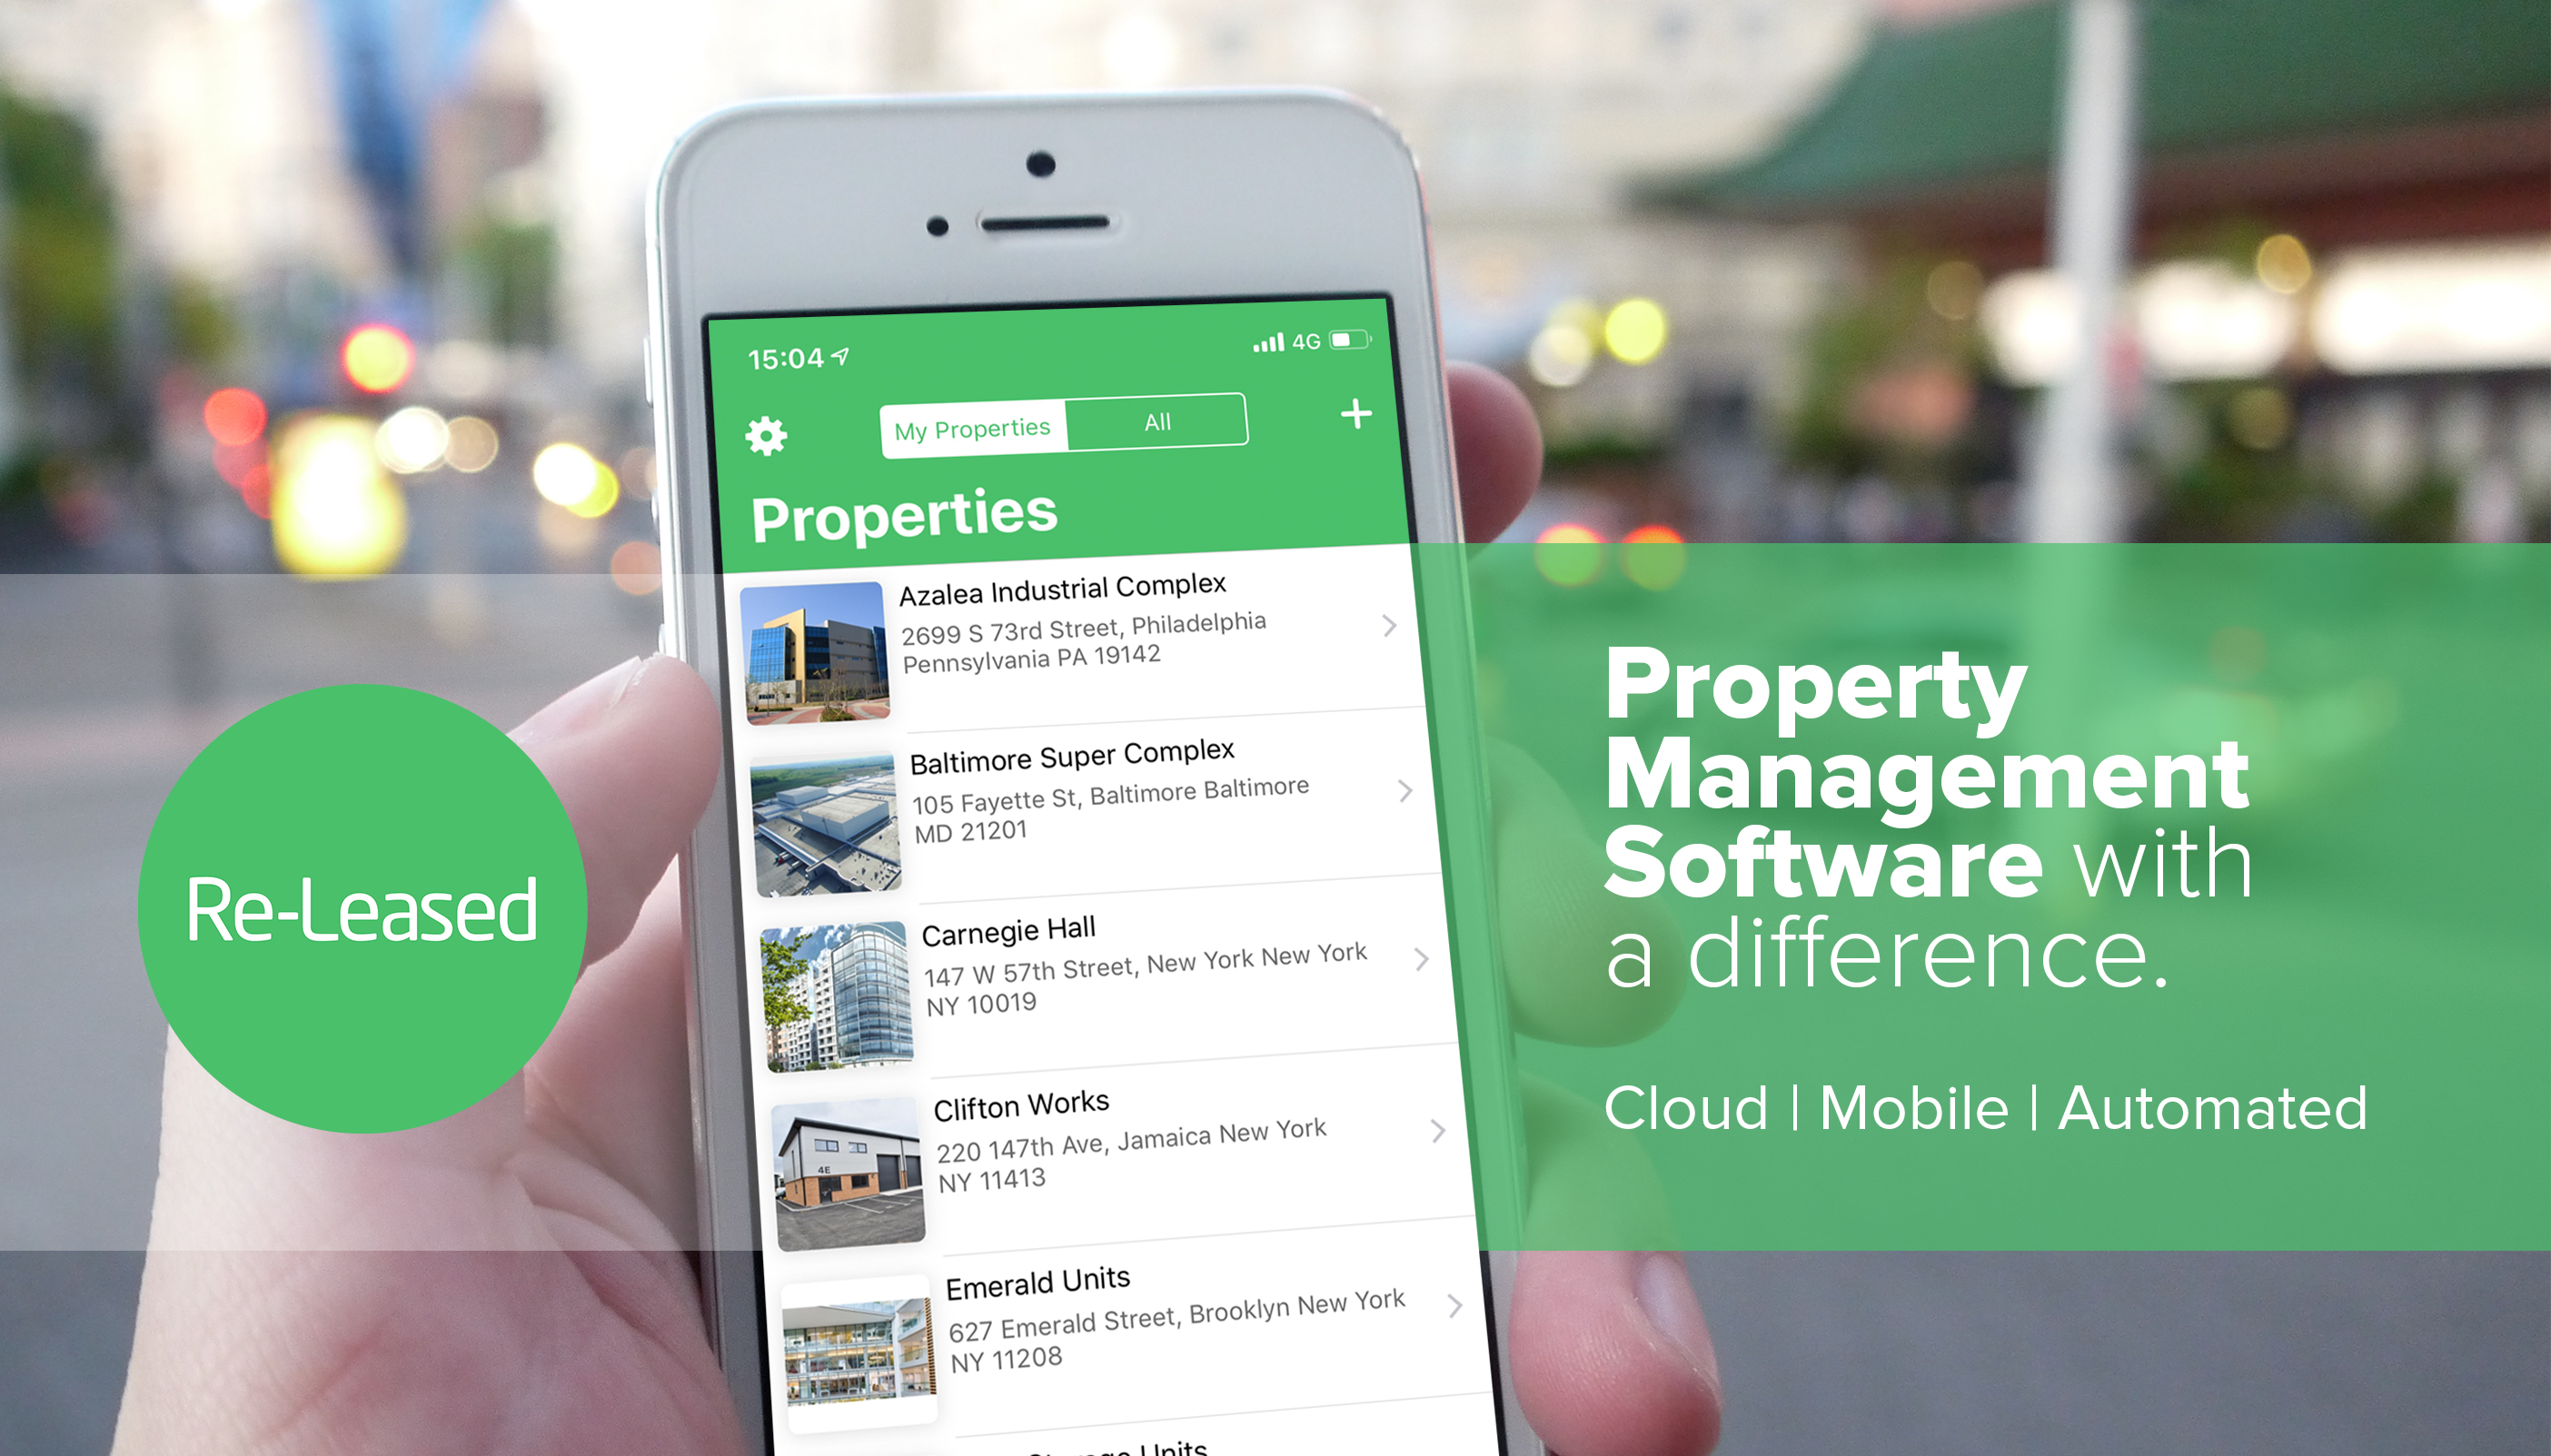 ReLeased Commercial Property Management Software